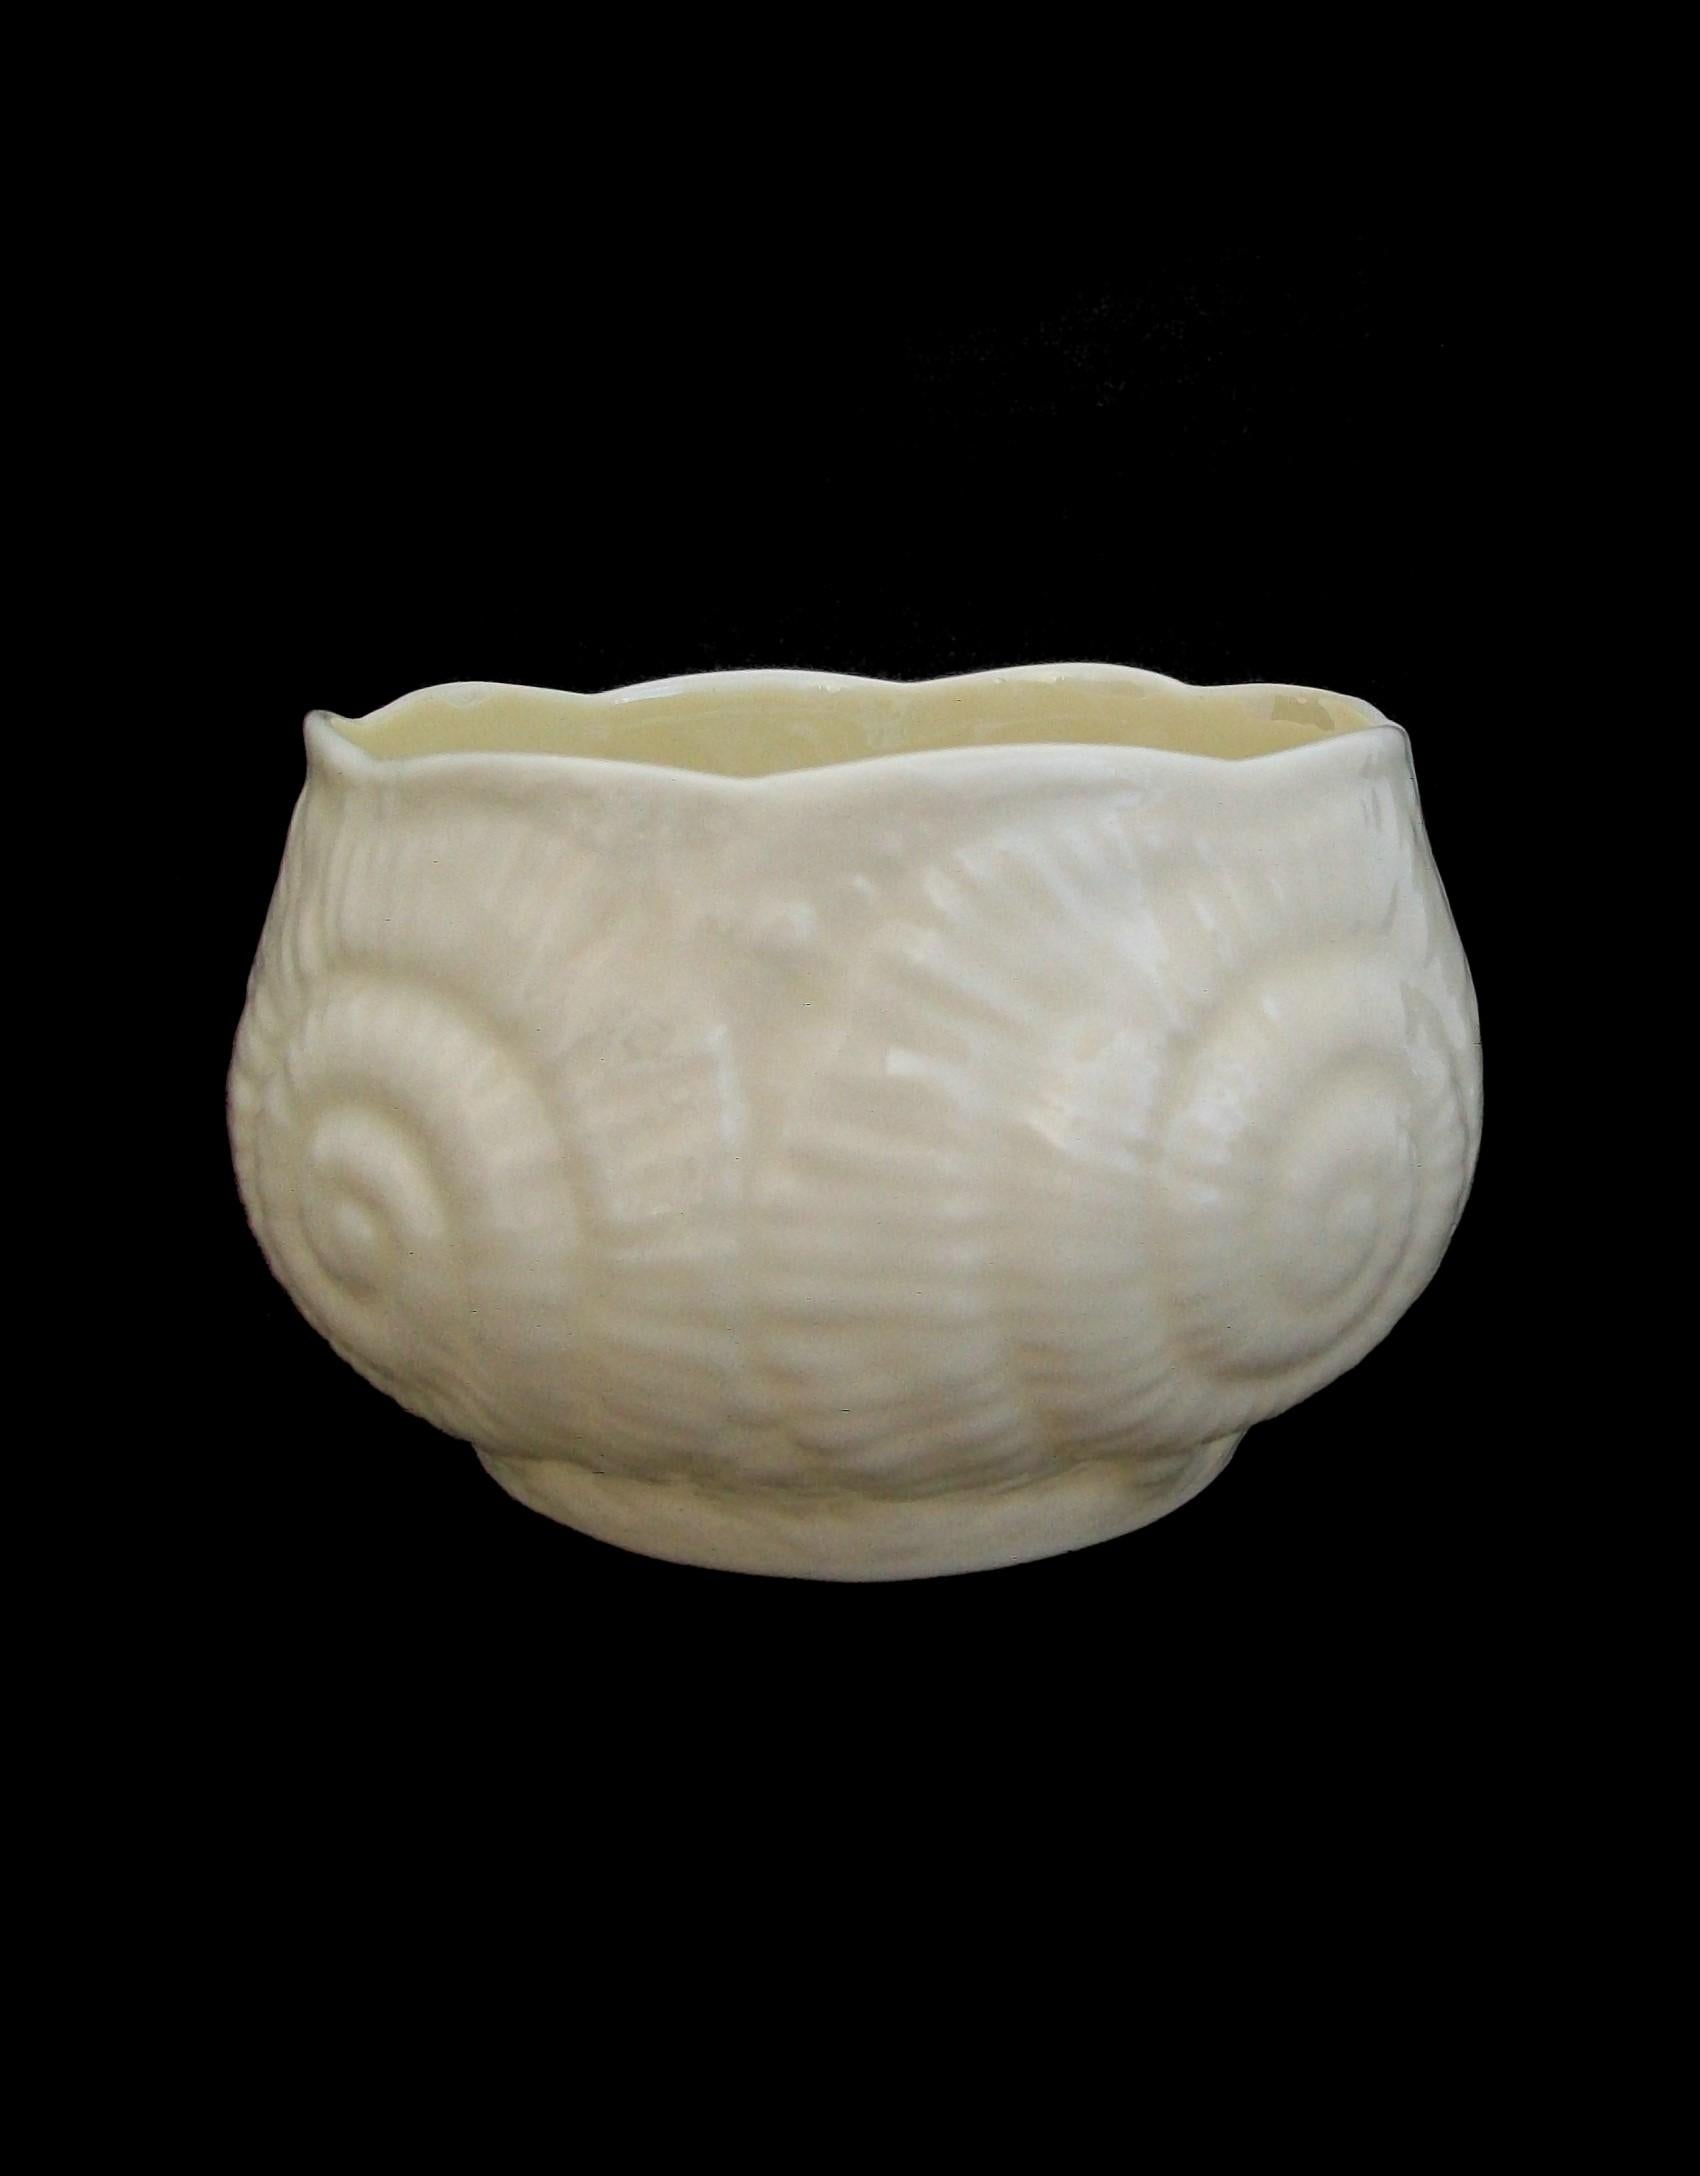 BELLEEK (Manufacturer) - ' Neptune ' (Pattern) - Vintage porcelain sugar bowl - featuring a yellow iridescent glaze to the interior of the bowl - green maker's mark to the bottom - Ireland - circa 1965 to 1980.

Excellent/mint vintage condition -